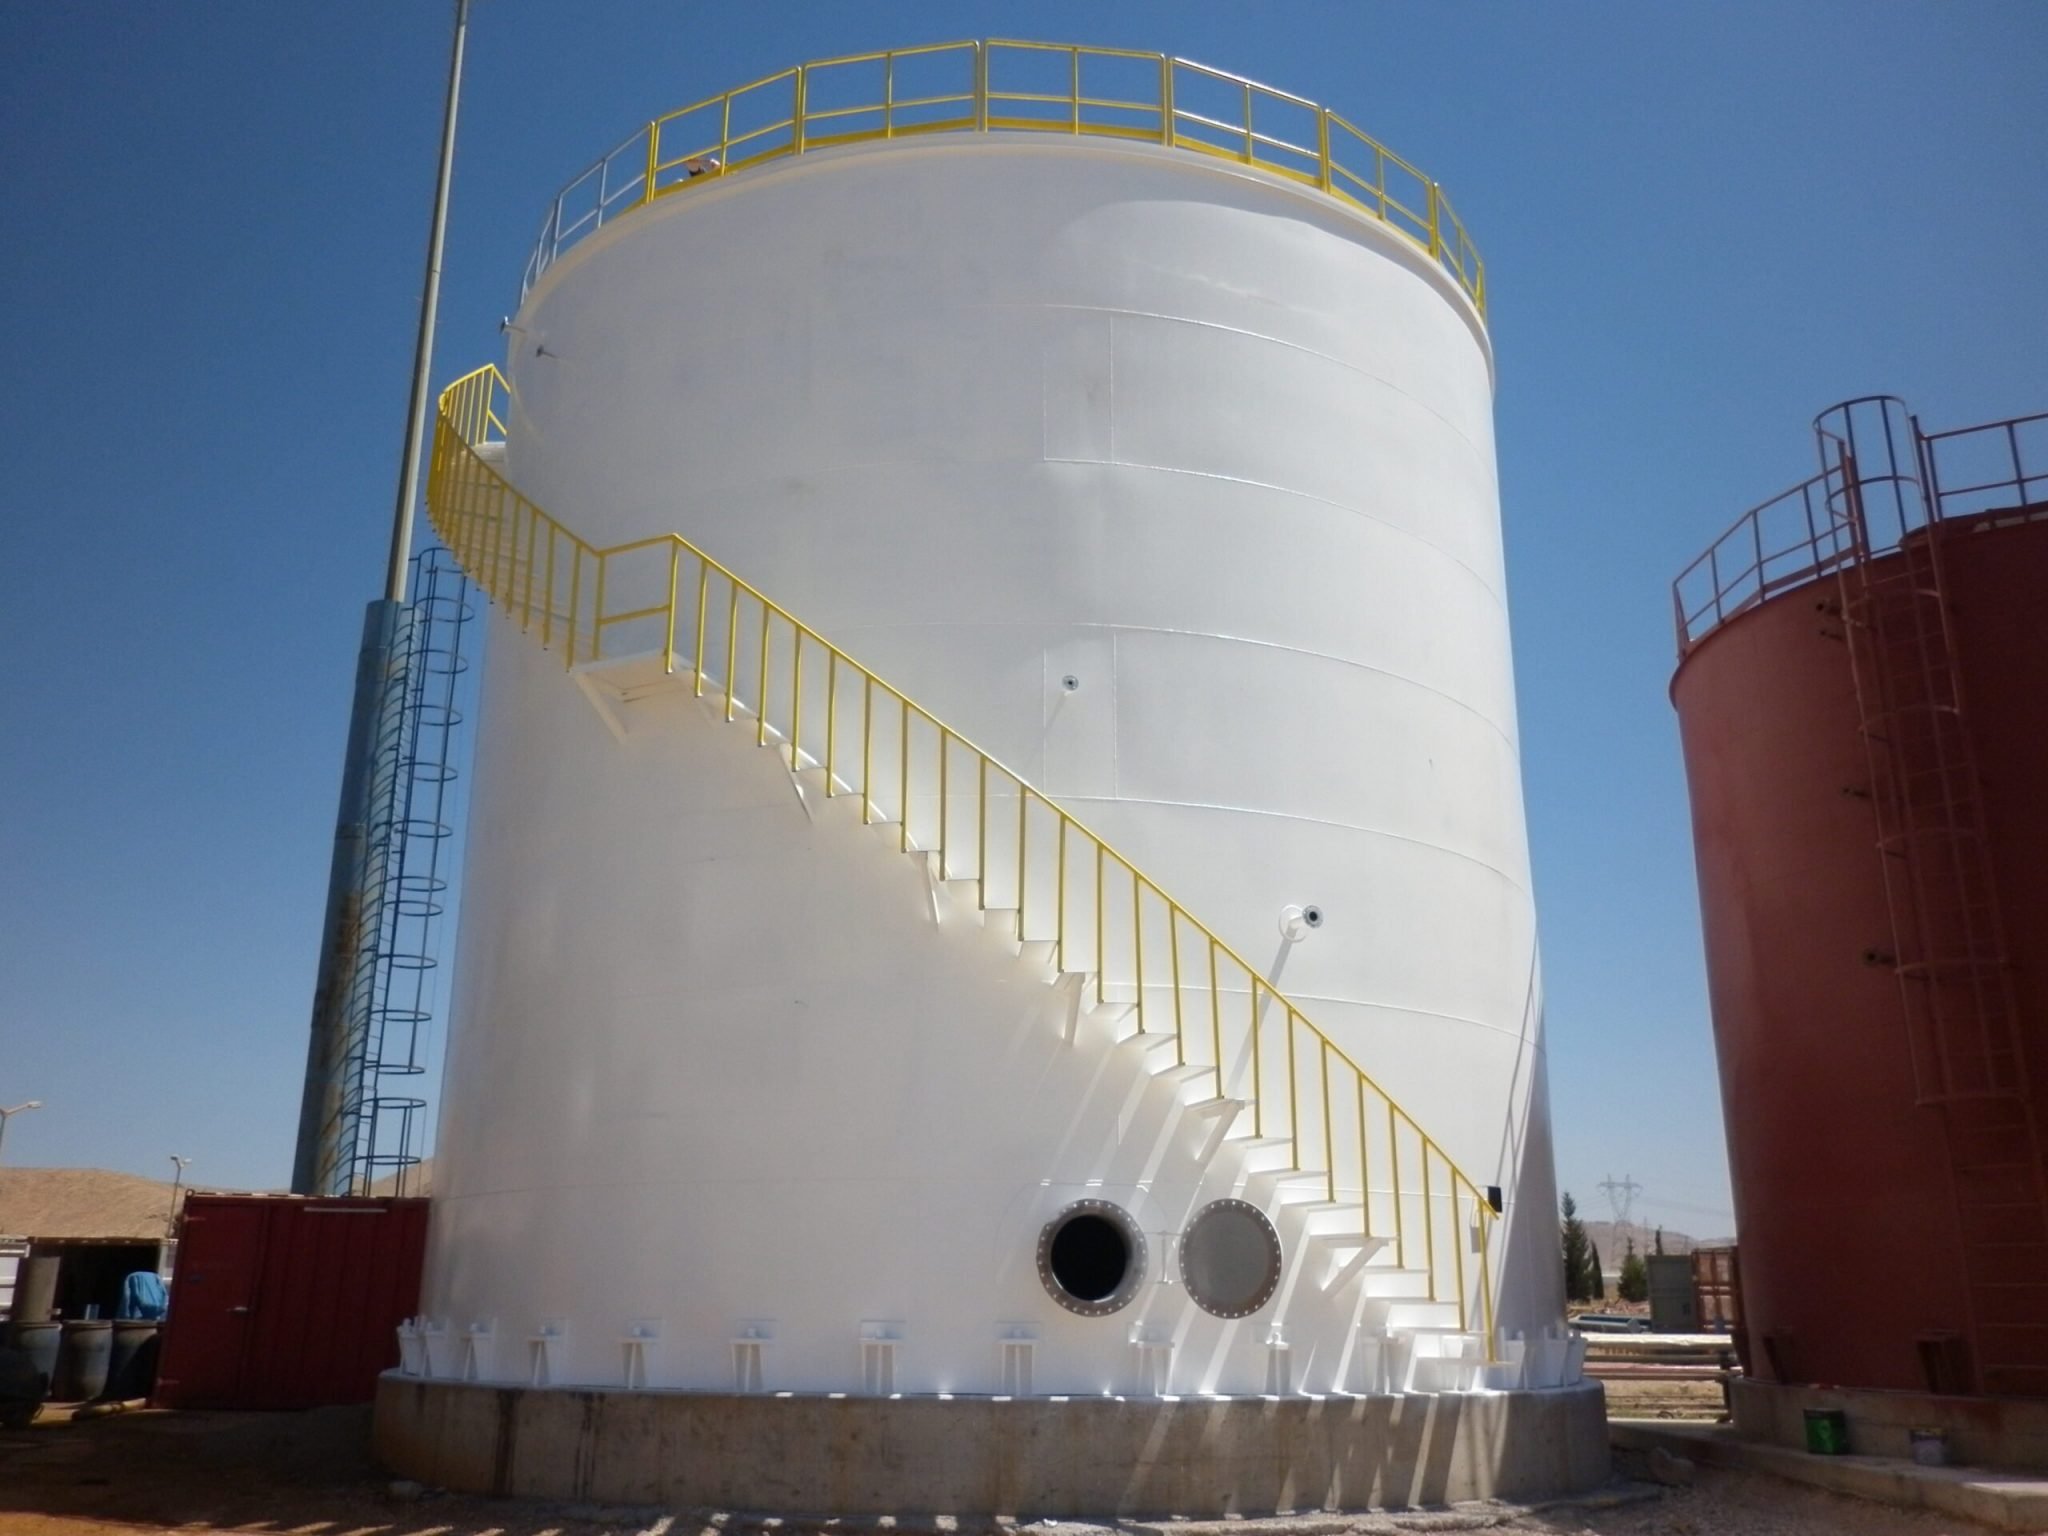 Water Storage Tanks - Fire Protection Tanks -Southwest Water Tanks